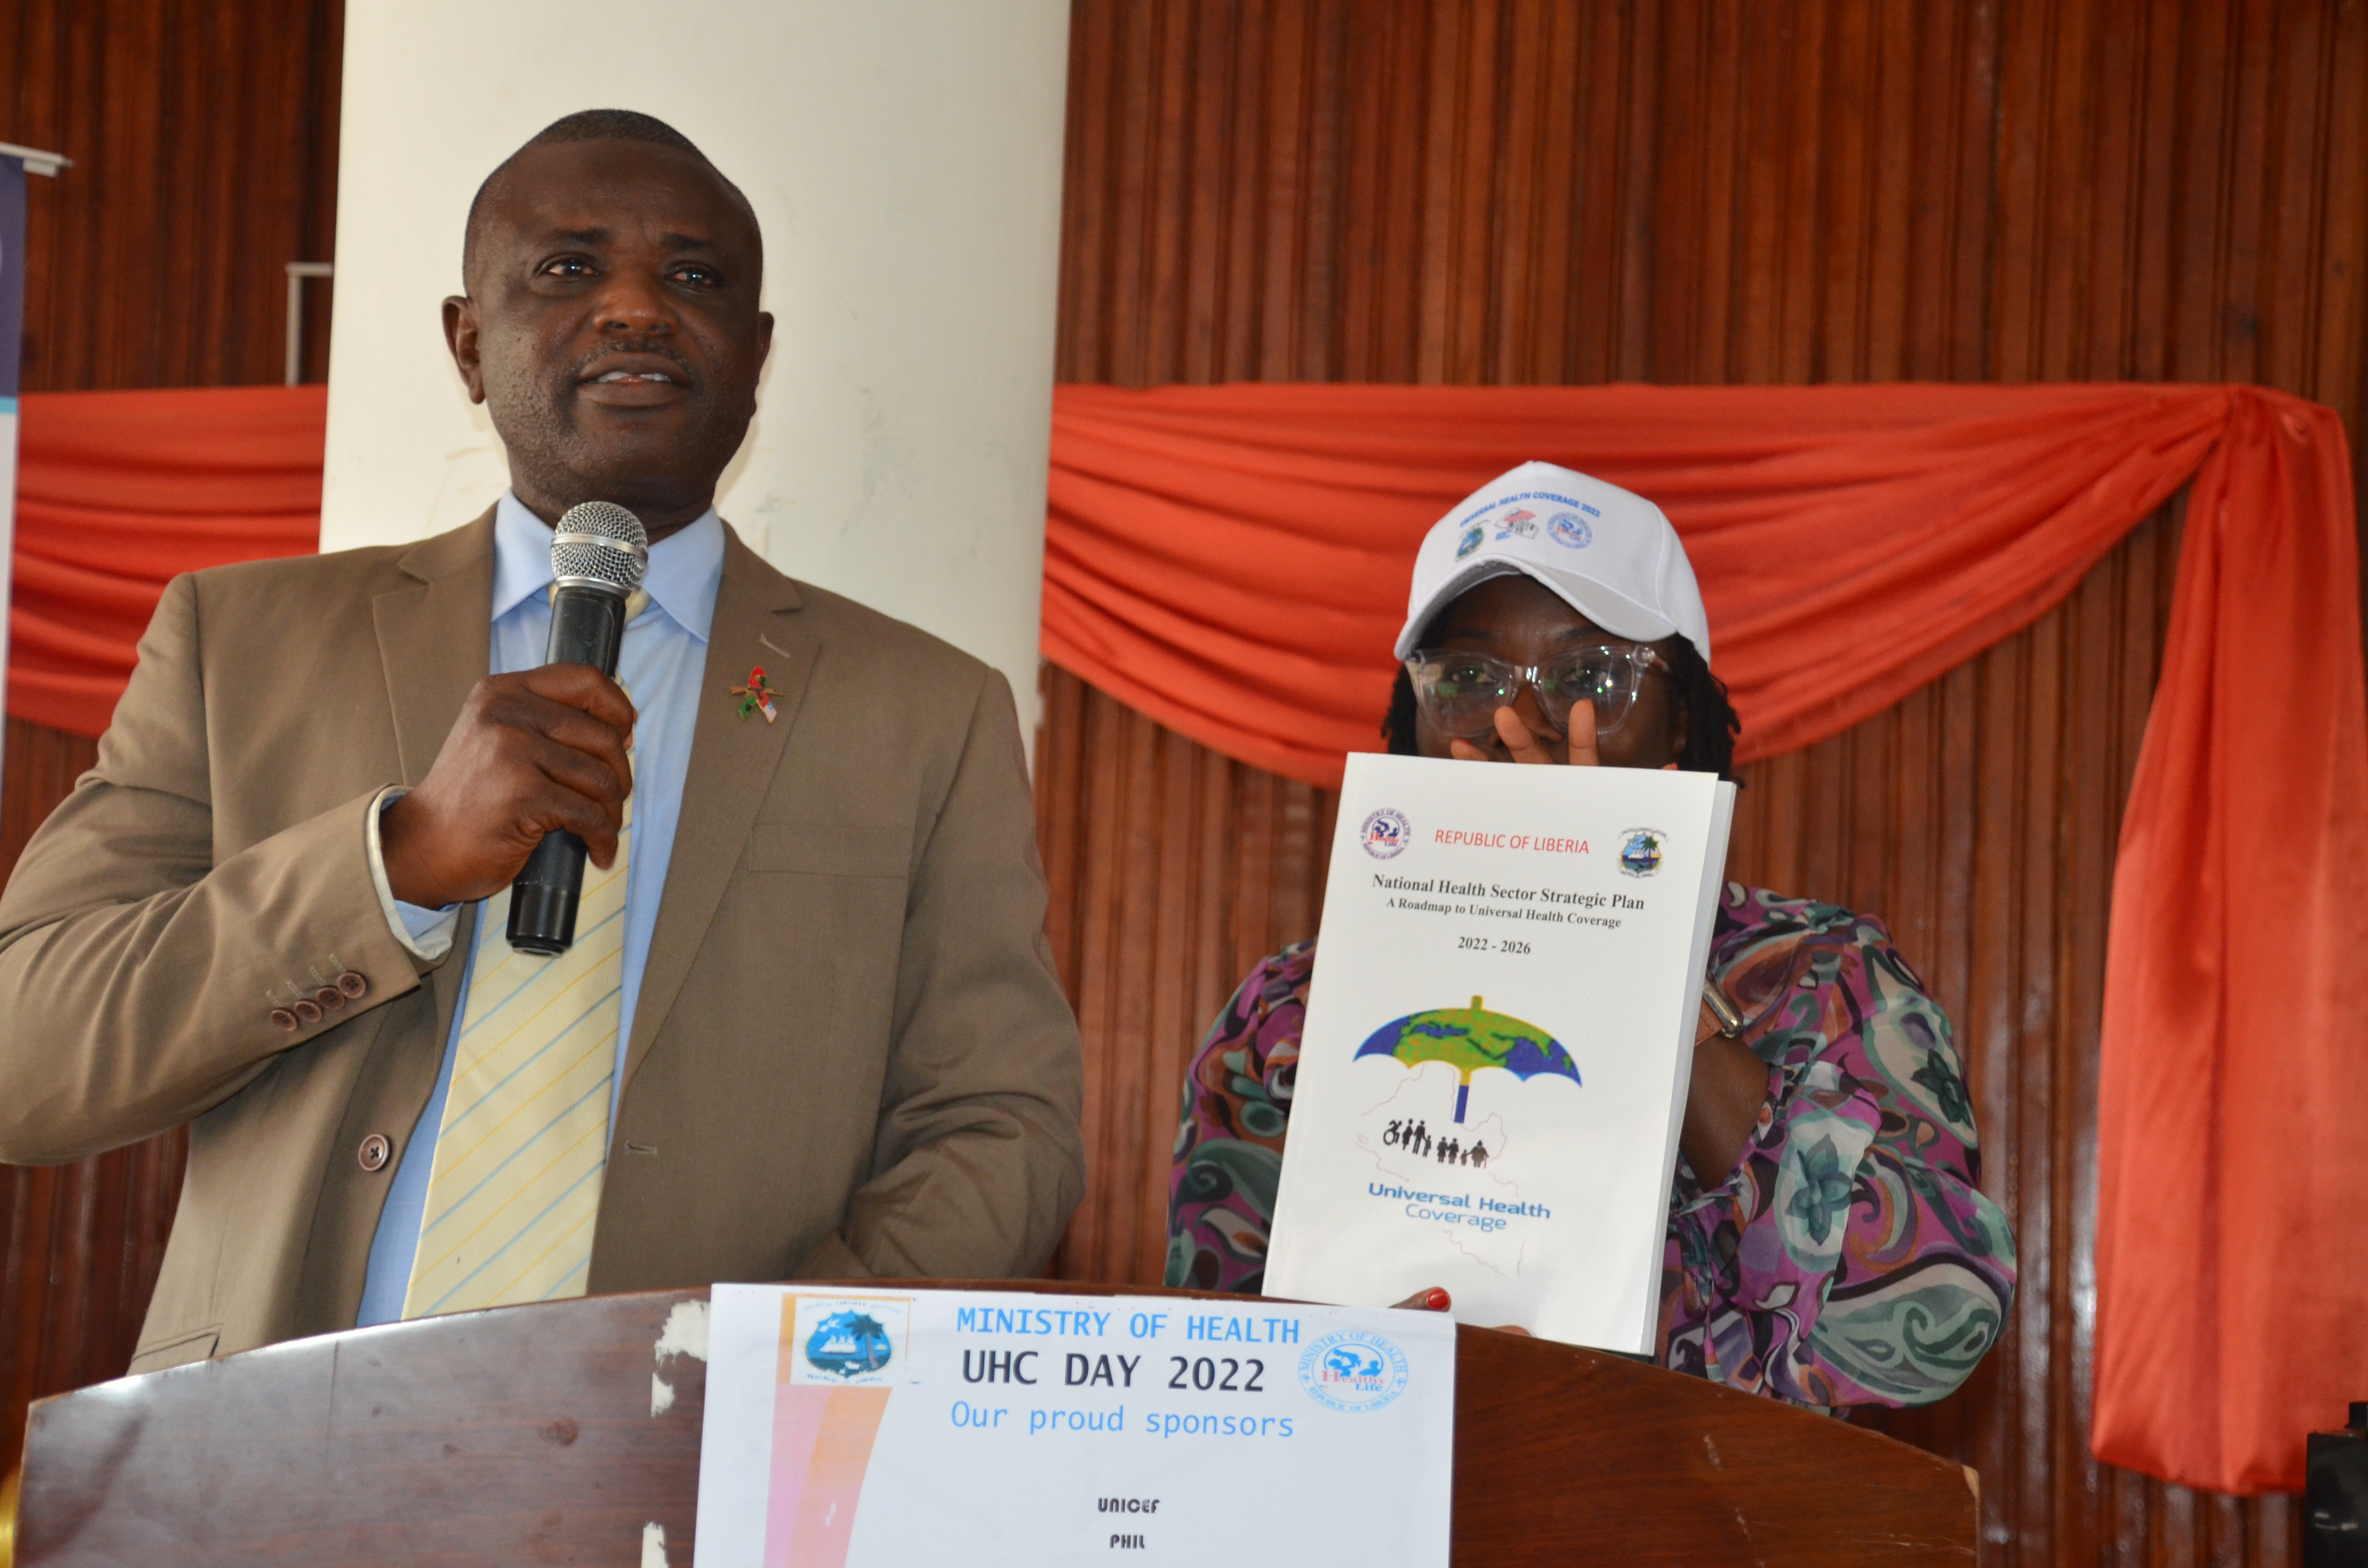 Dep Min Howard, MOH launching key policy documents during the commemoration of UHC Day 2022 